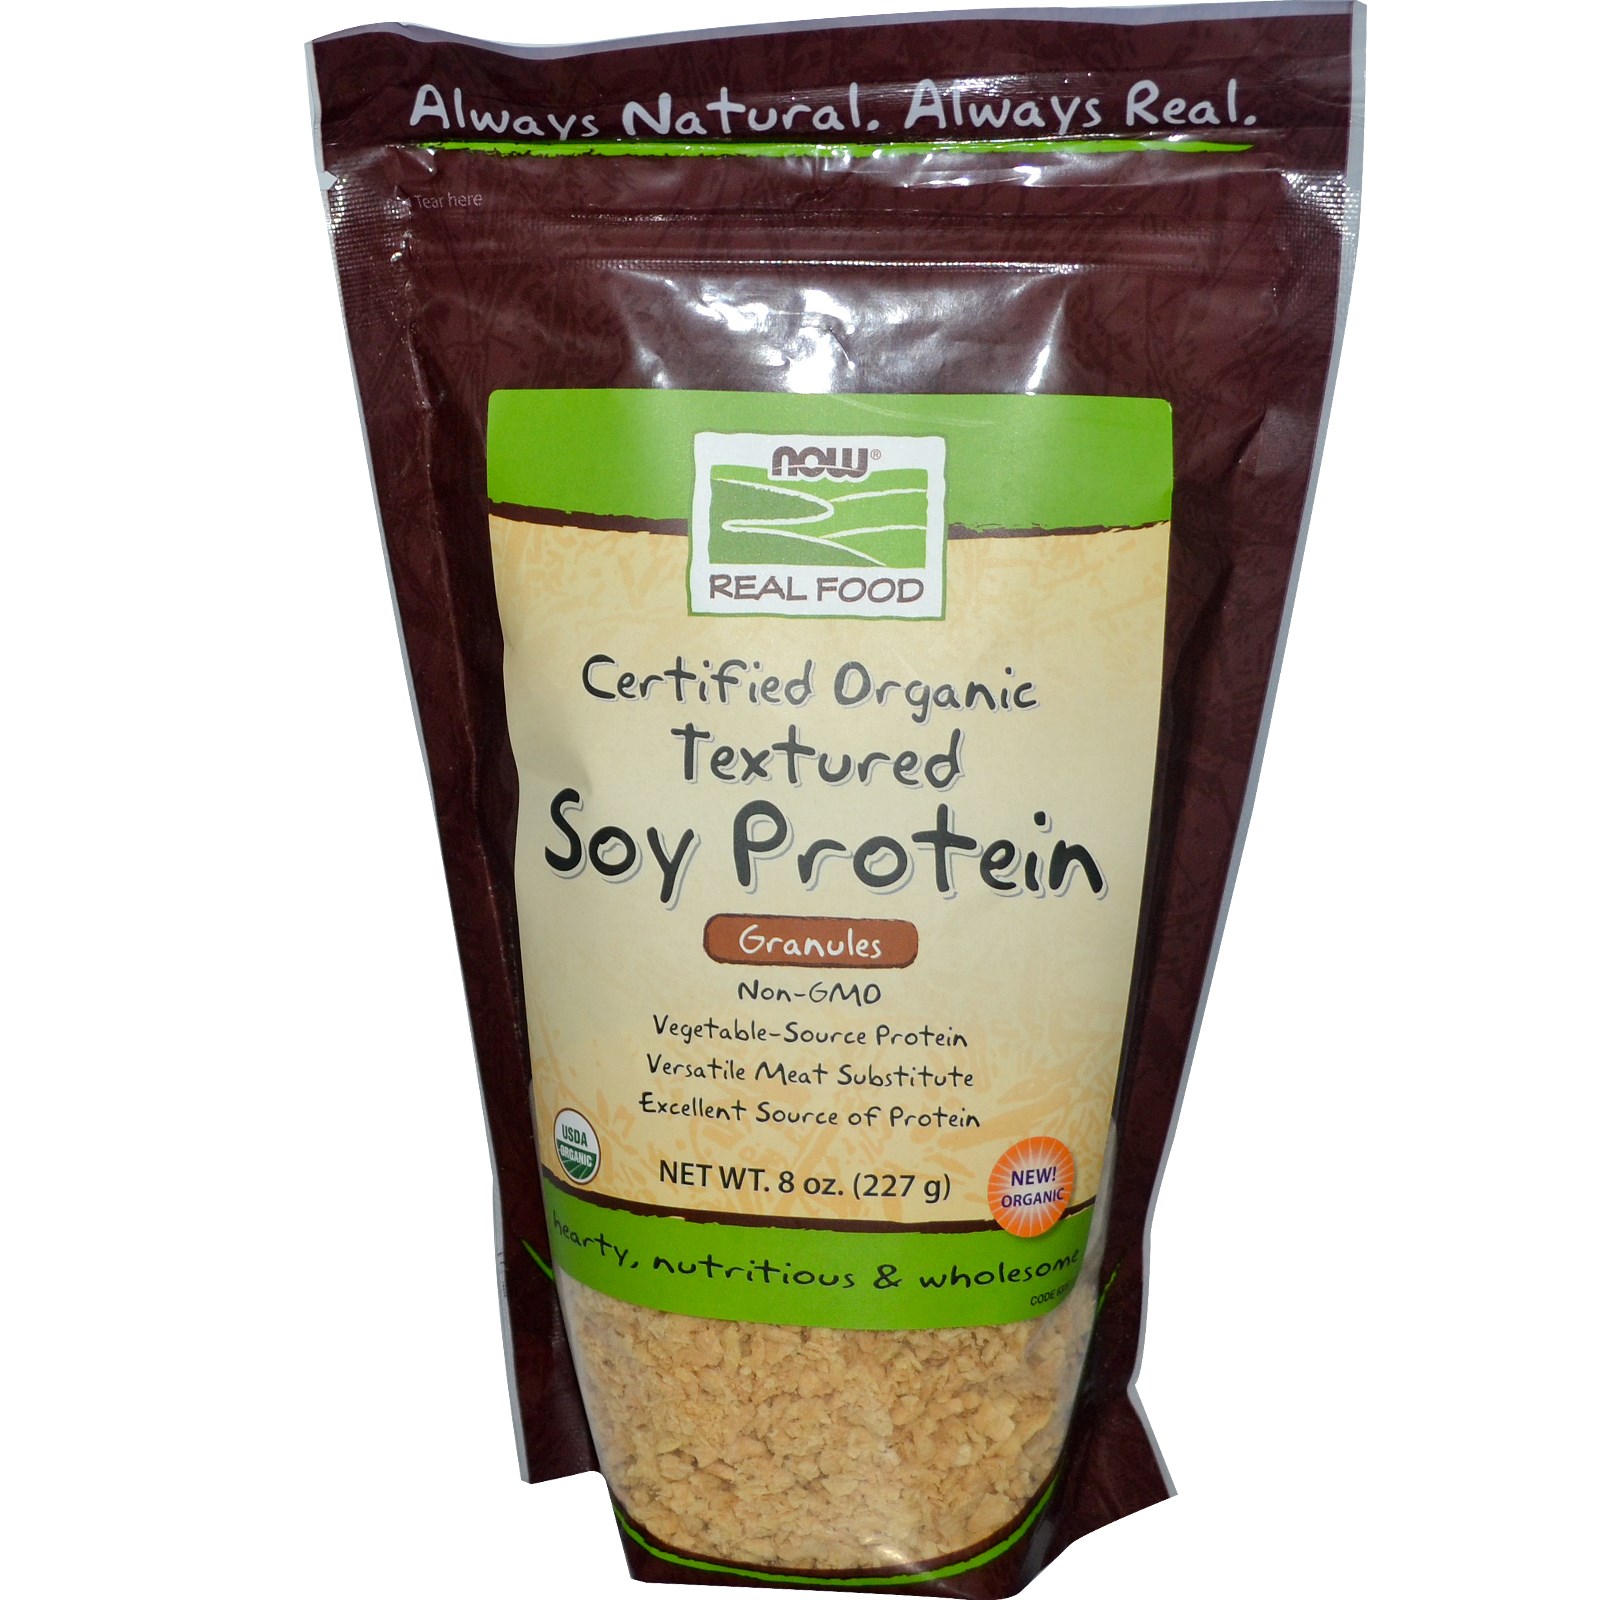 Textured Soy Protein Granules (Certified Organic) - 8 oz.